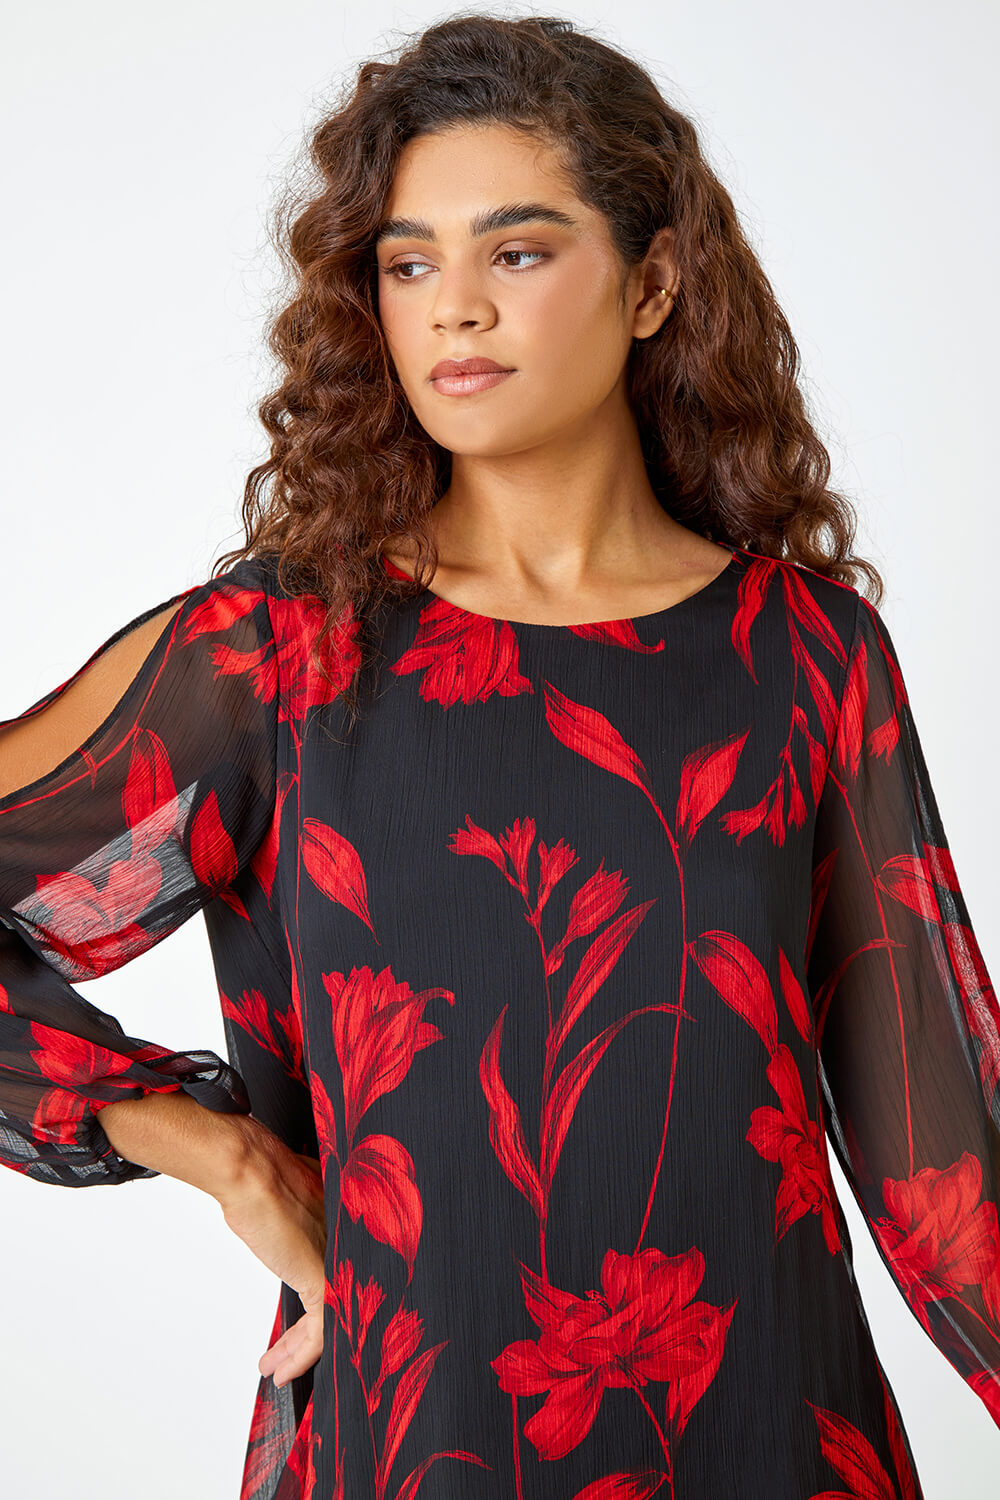 Red Floral Chiffon Layered Tunic Top, Image 4 of 5